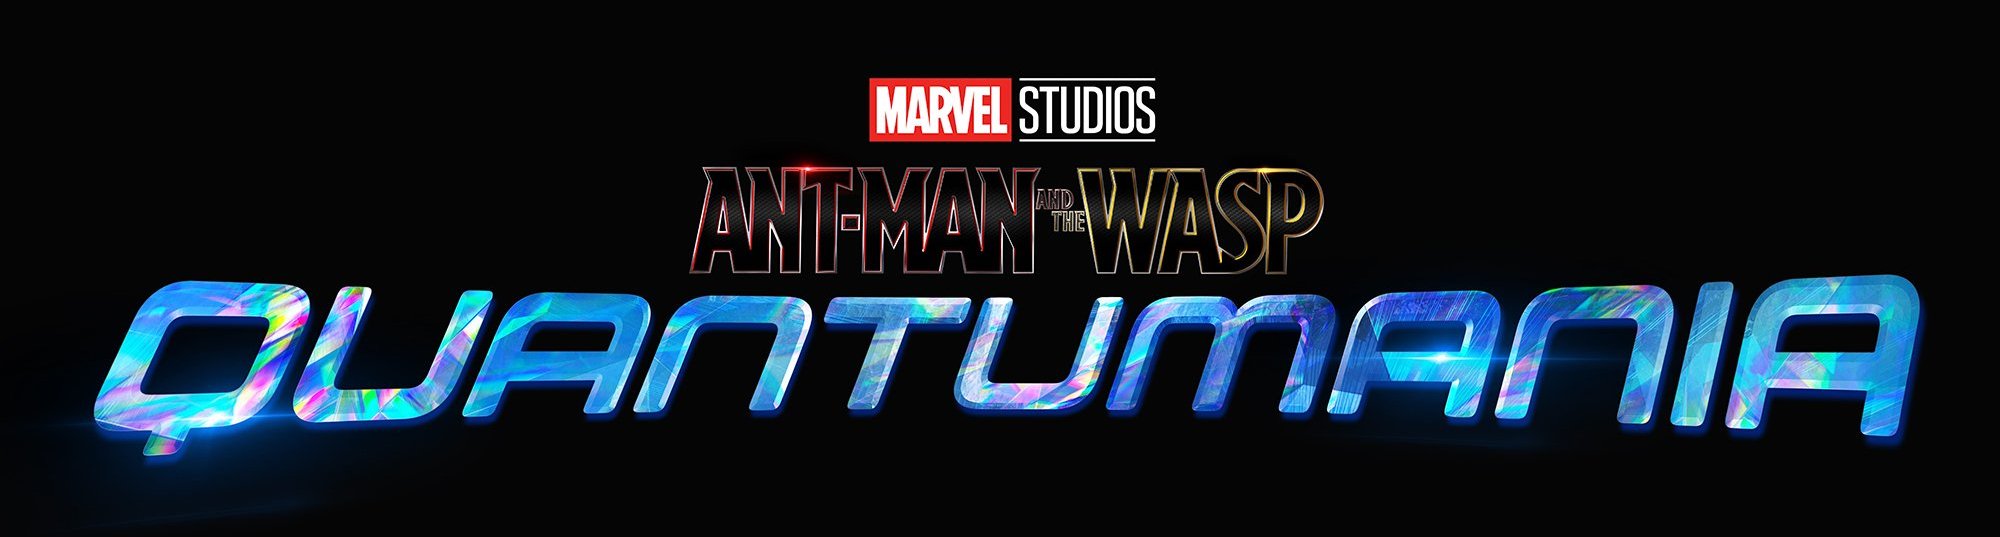 Antman Wasp 3 Title Card